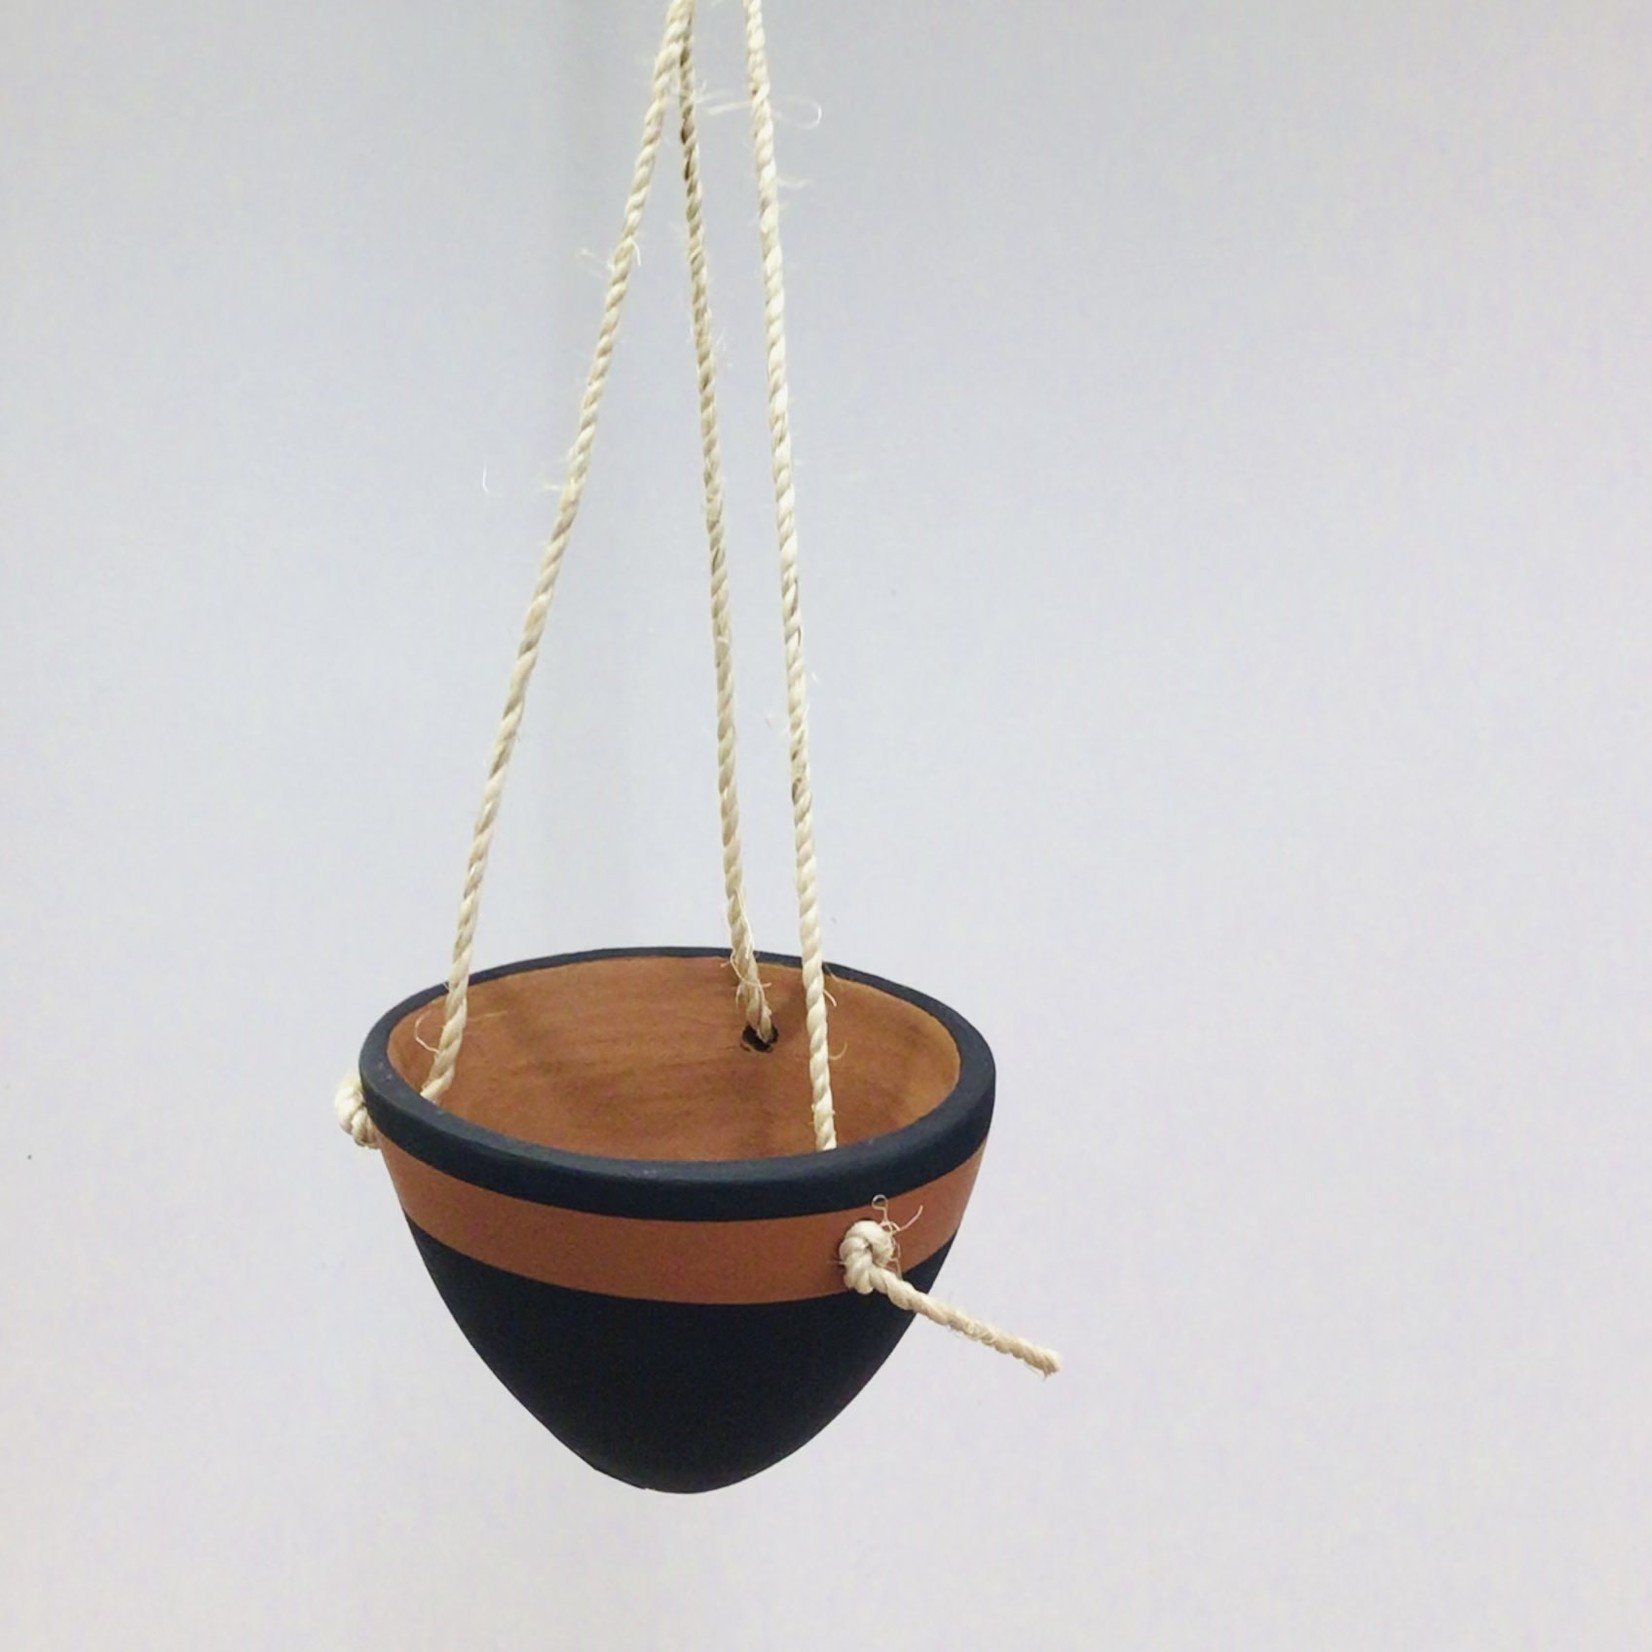 Women of the Cloud Forrest Small Hanging Black Terracotta Planter, Nicaragua